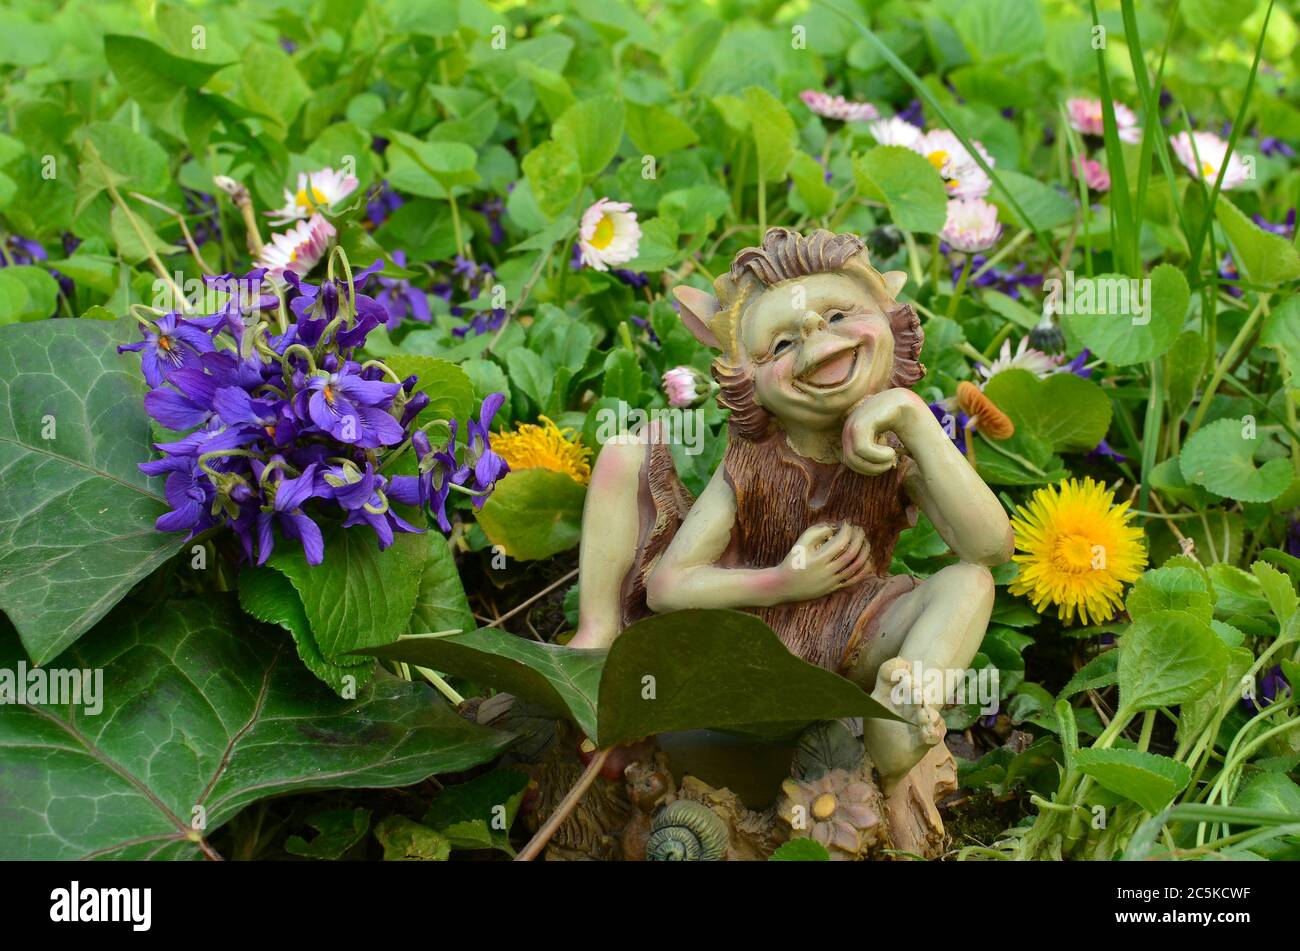 Bouquet of fragrant violets with Ivy leaves and elf doll on a lawn Stock Photo